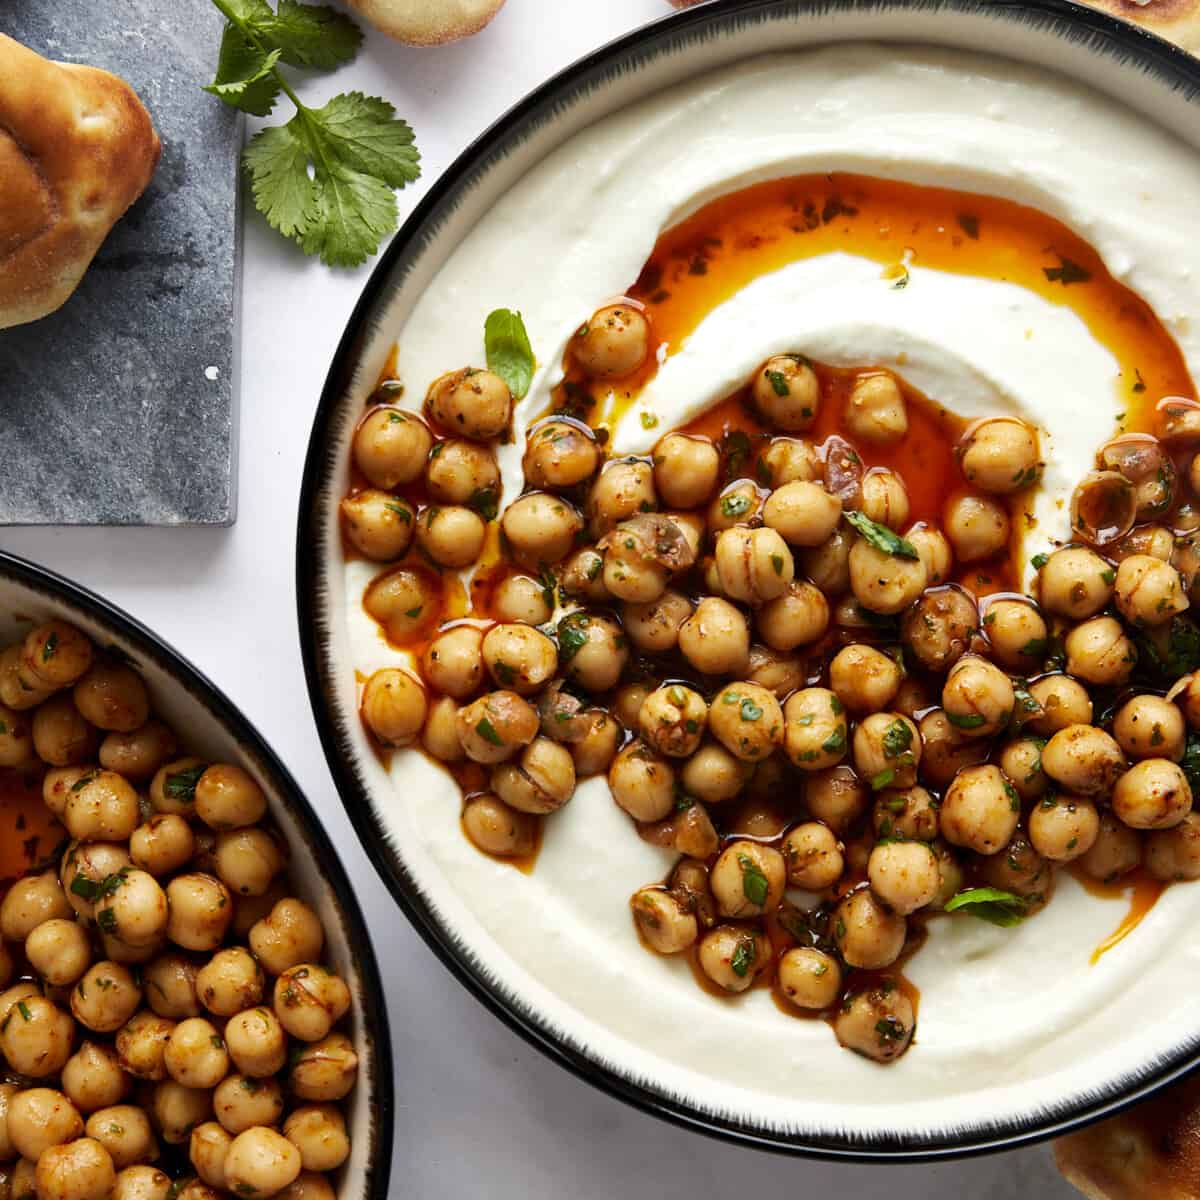 A bowl of whipped feta topped with marinated chickpeas.